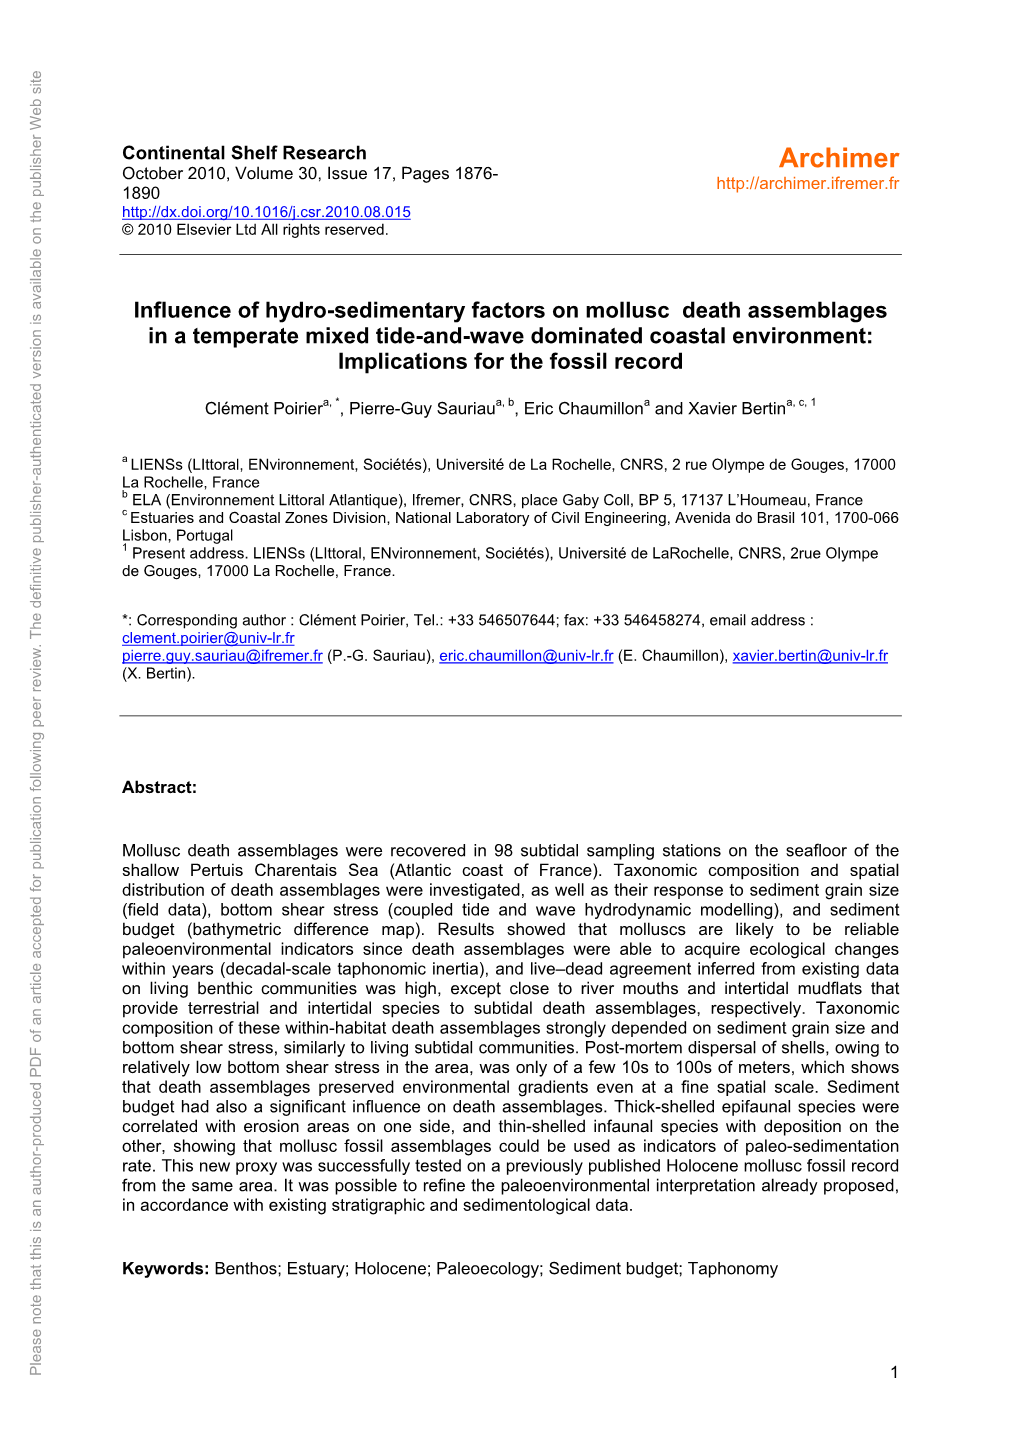 Influence of Hydro-Sedimentary Factors on Mollusc Death Assemblages in A